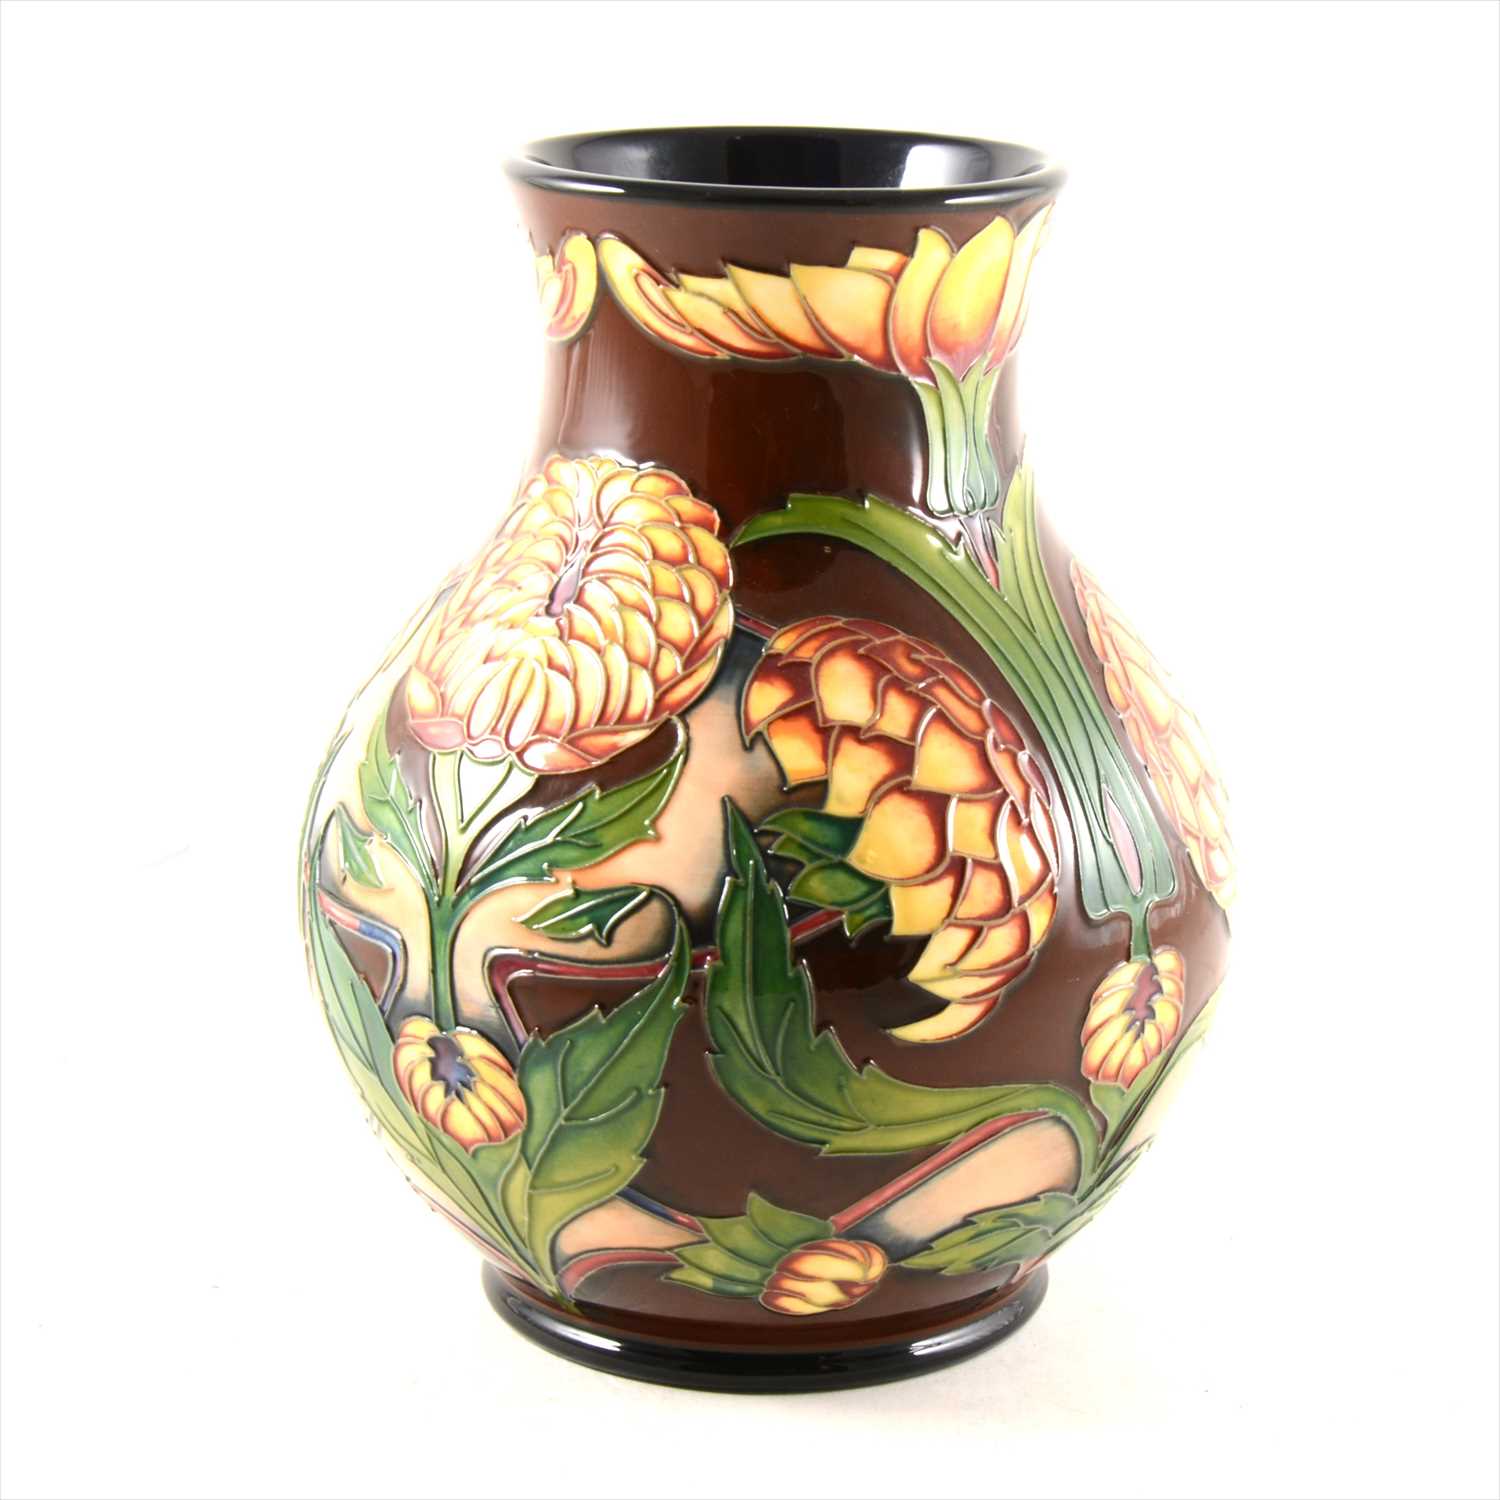 Lot 4 - A 'Dahlia' limited edition vase, designed by Philip Gibson for Moorcroft Pottery